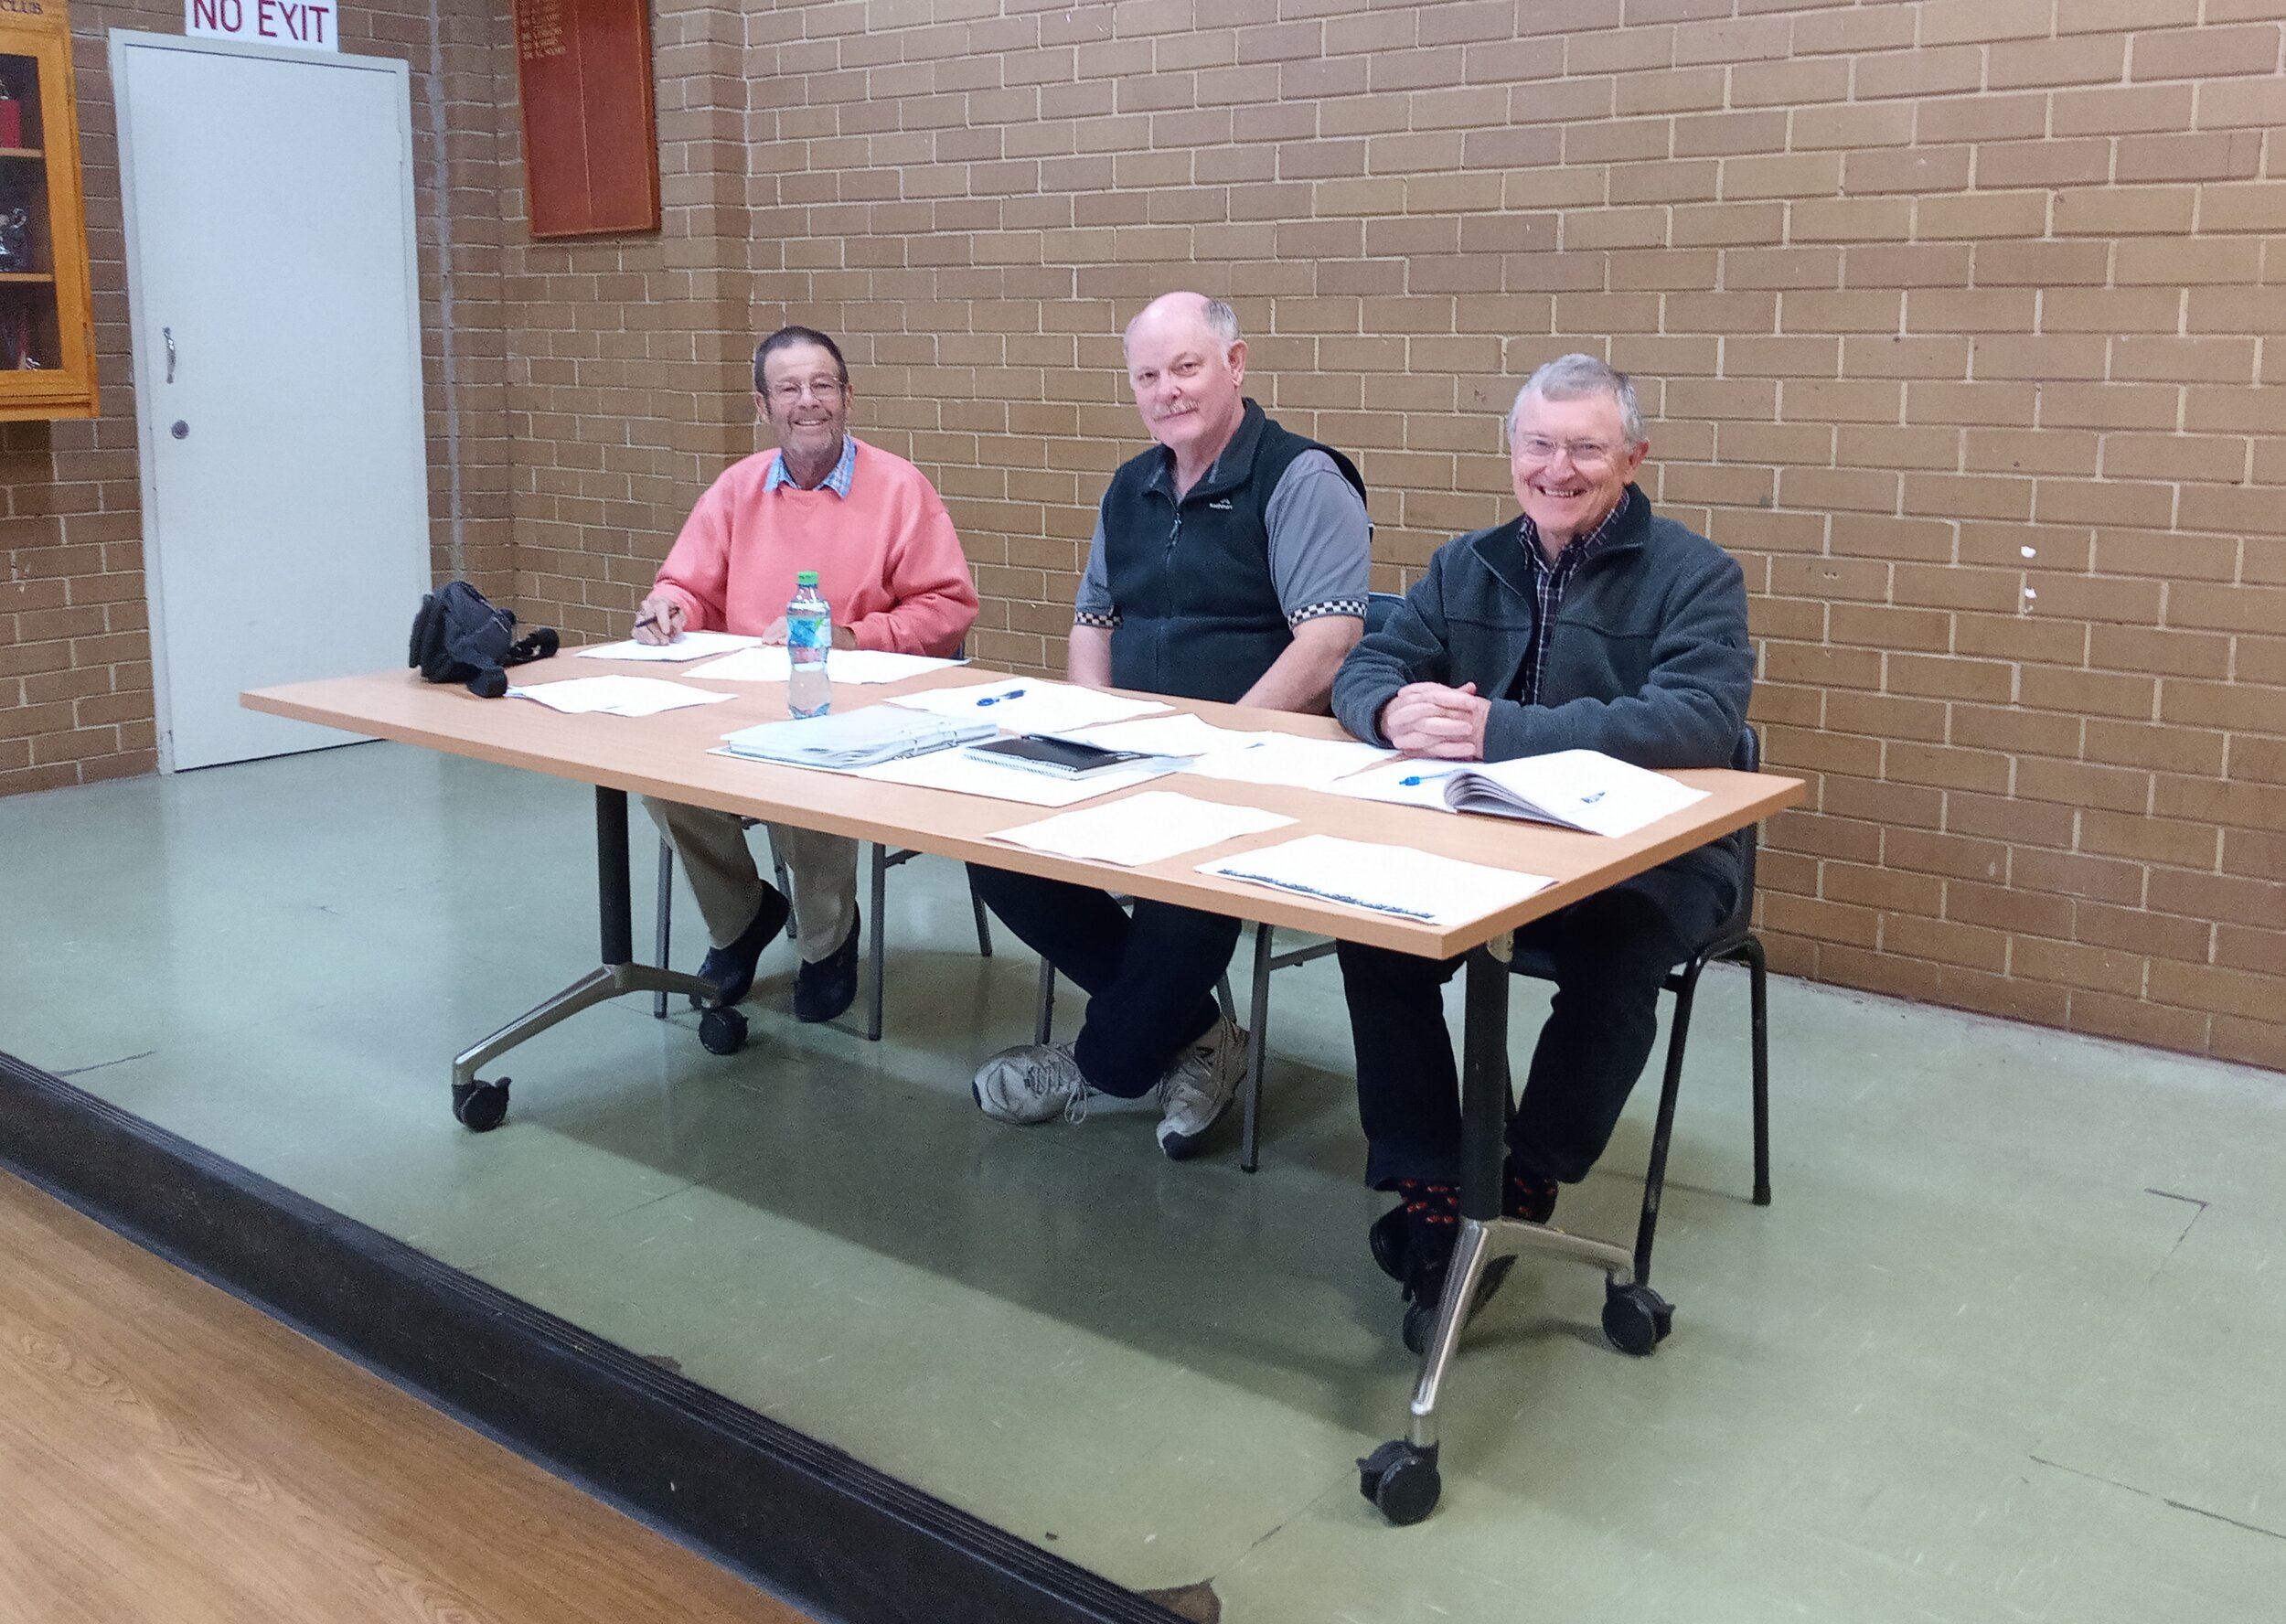  2/2  Rod, Simon and Geoff present to the AGM 